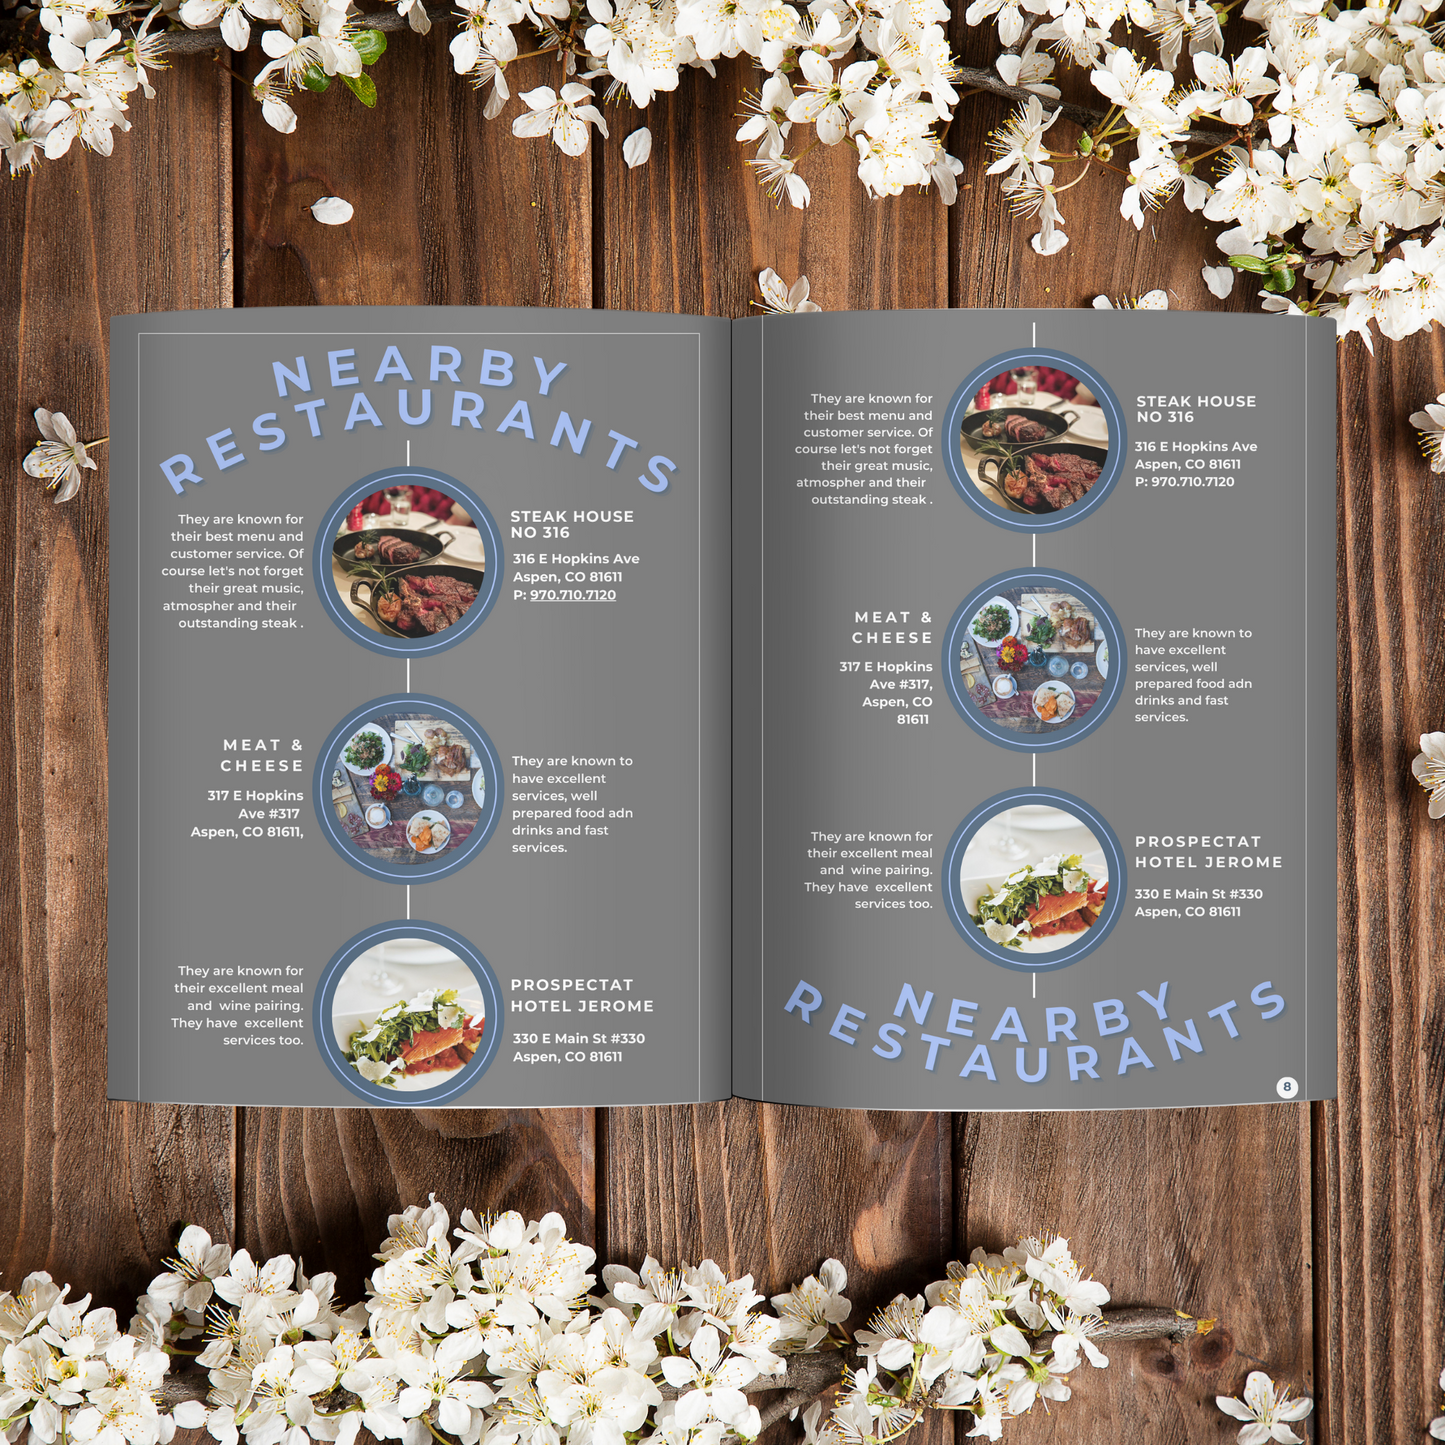 Editable Canva Airbnb Welcome Packet with a Winter Theme -VRBO Welcome Book Template for Canva, Vacation Rental Welcome Book Template